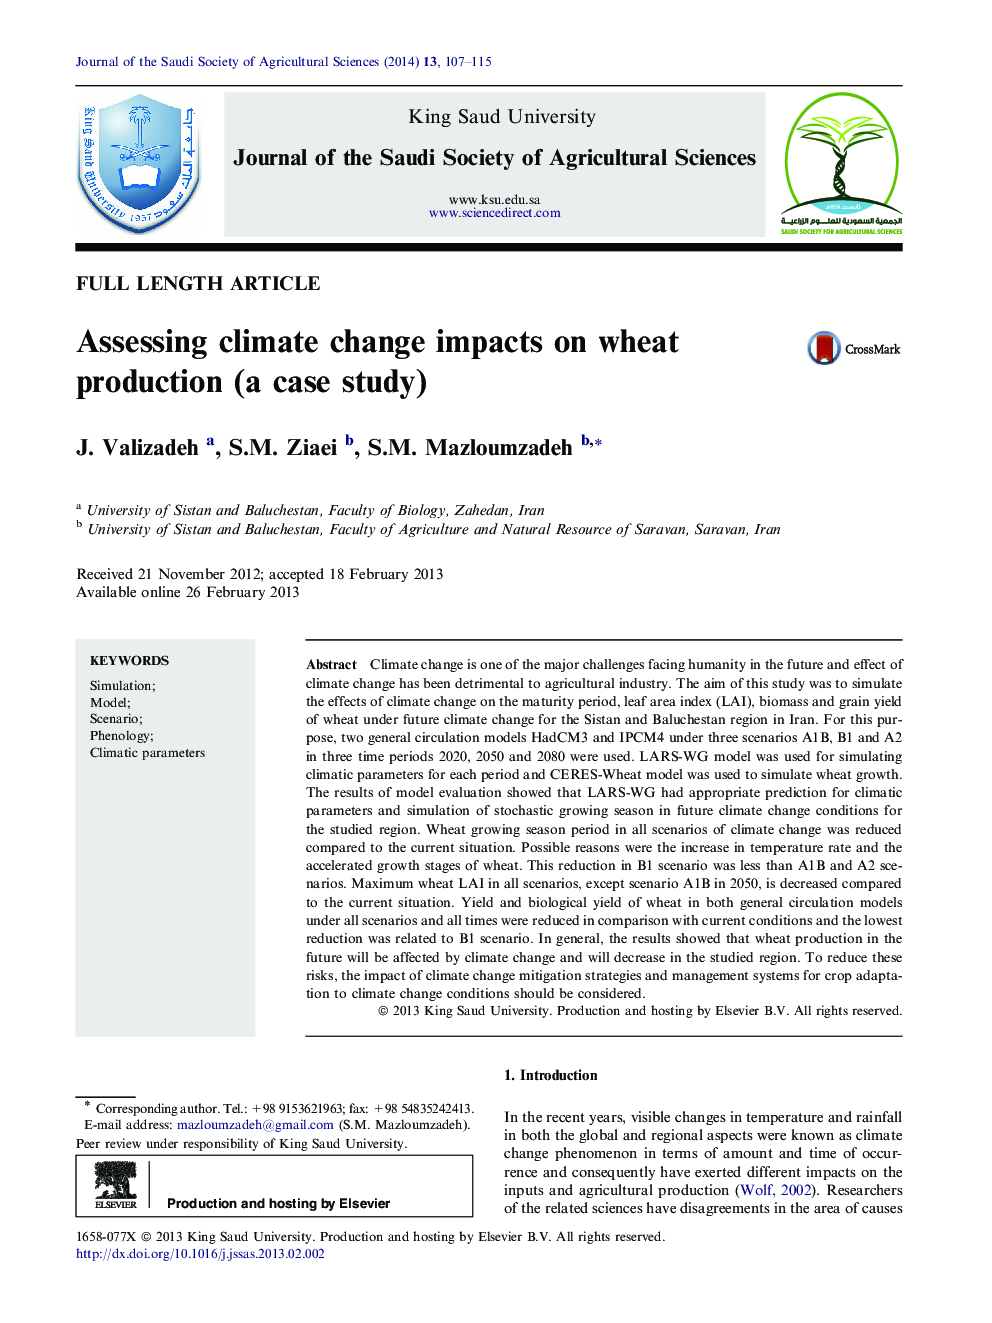 Assessing climate change impacts on wheat production (a case study) 